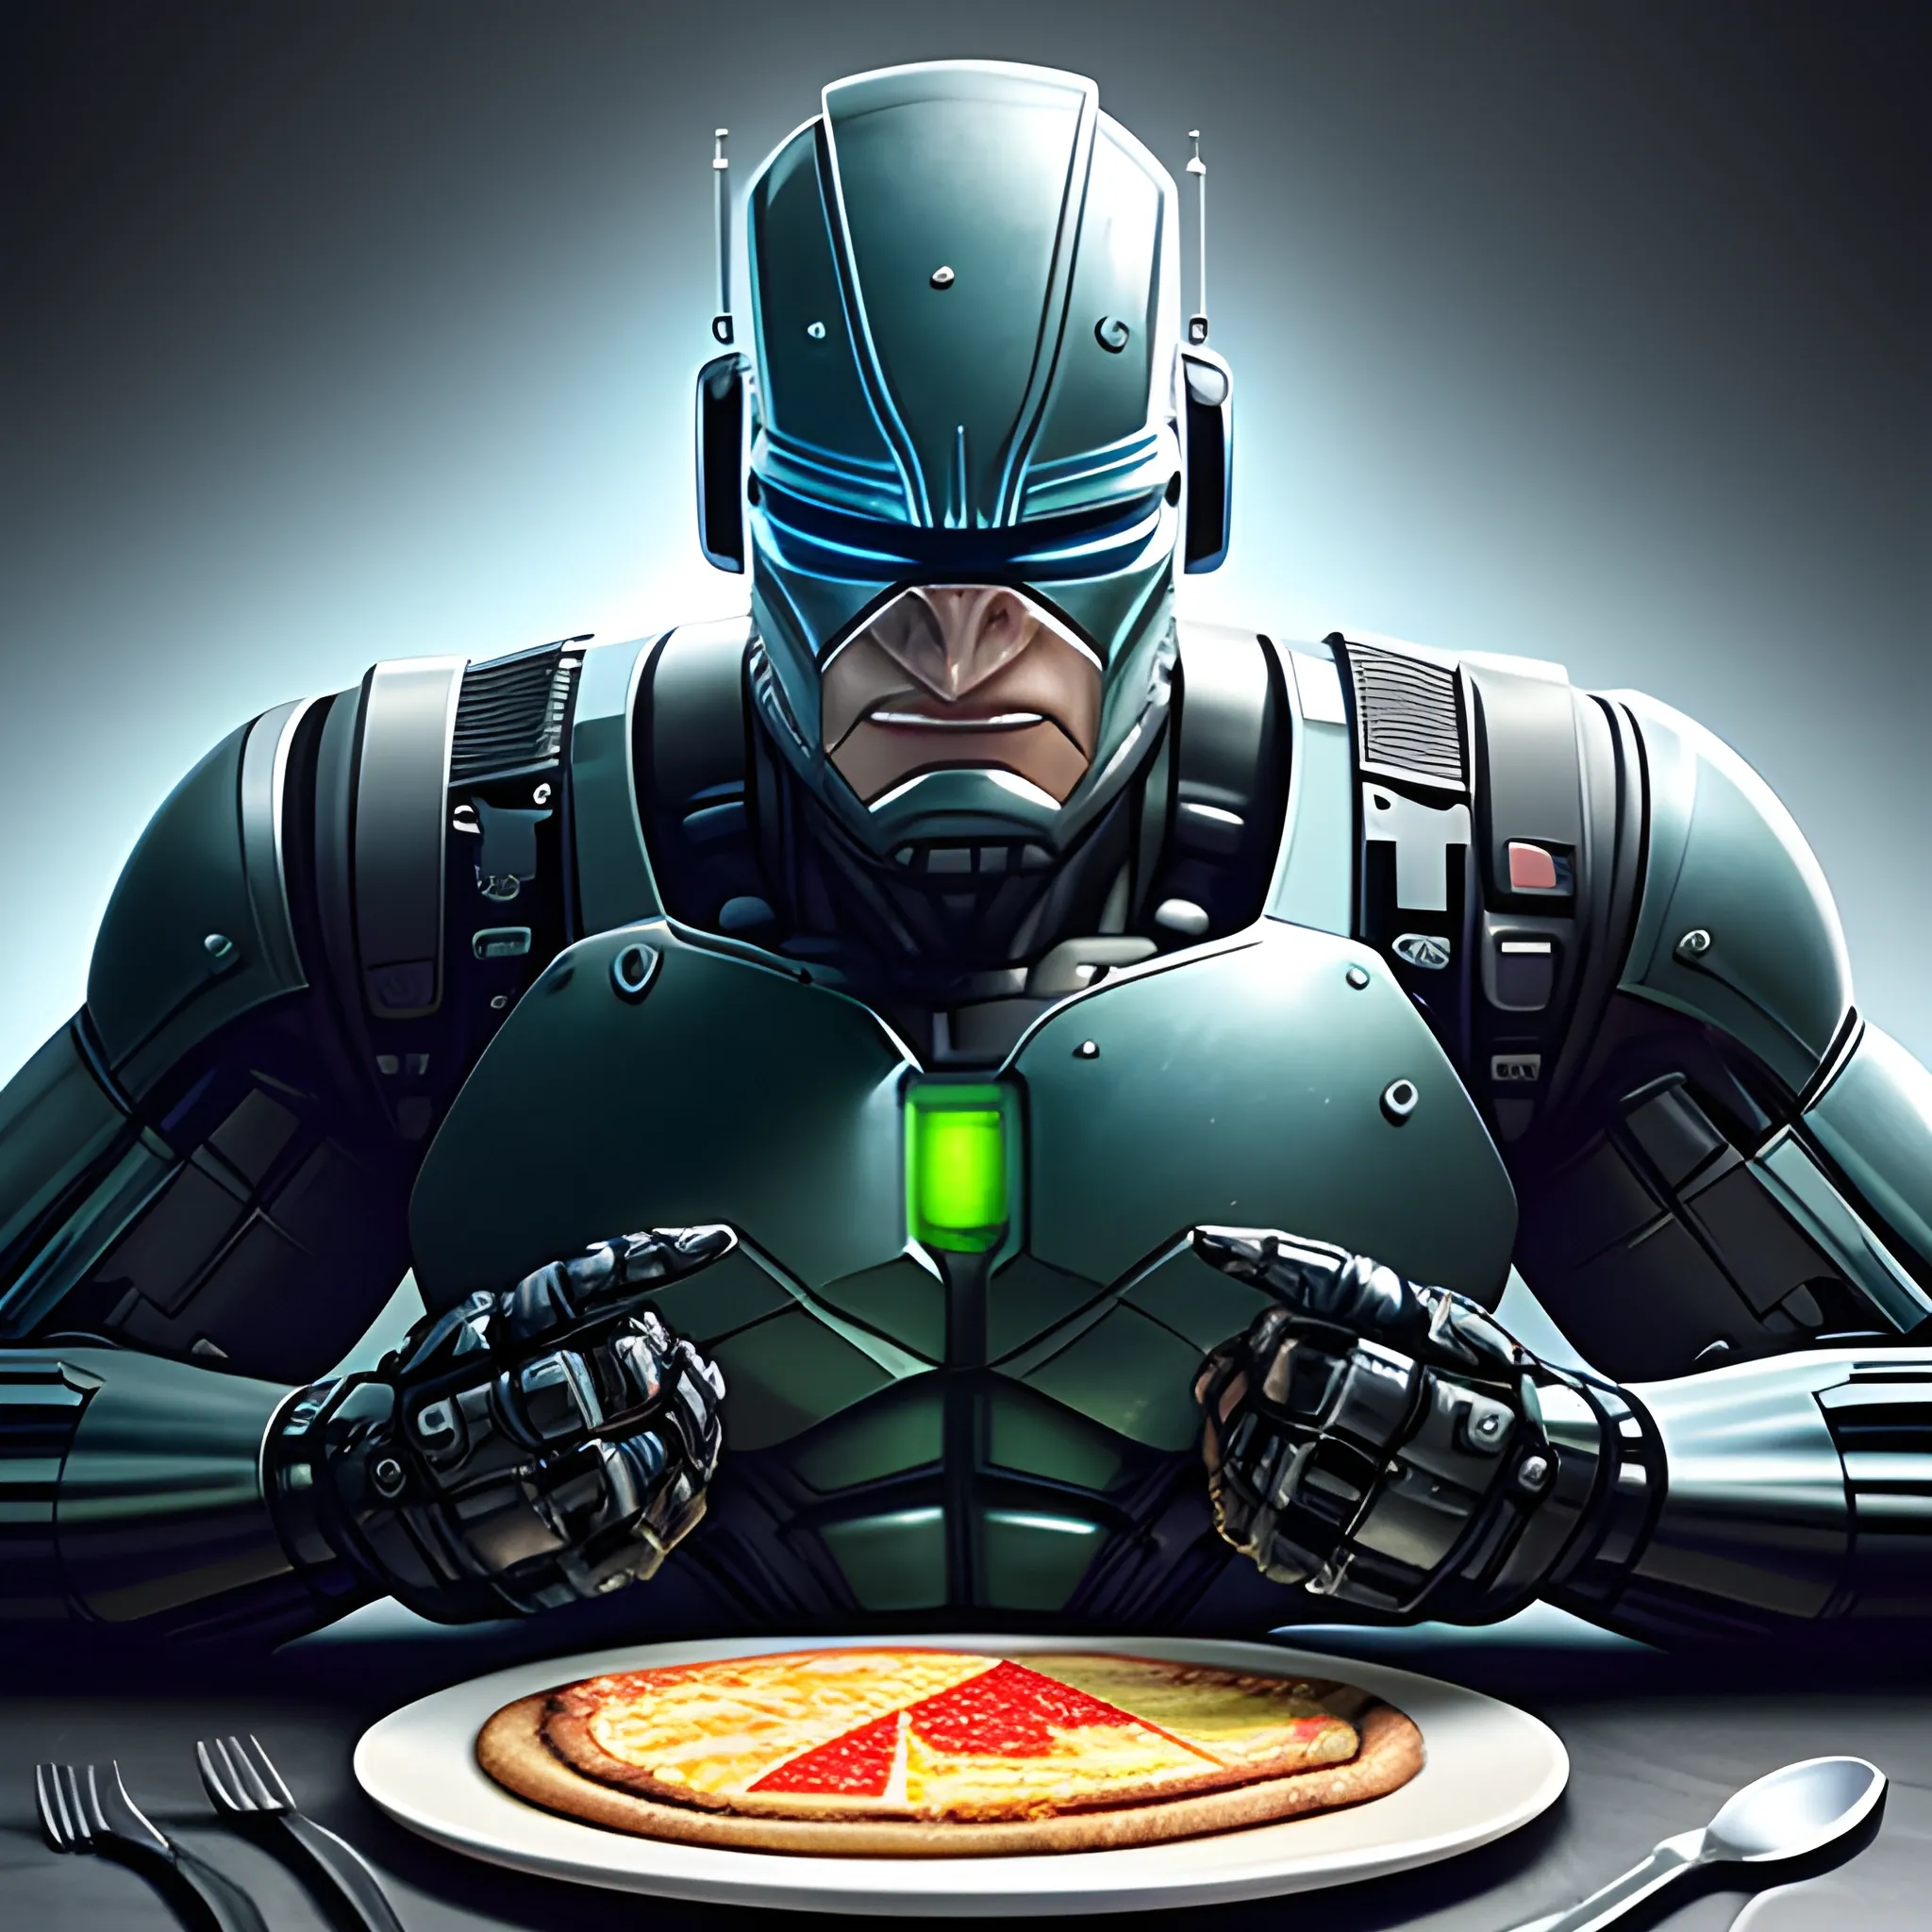 Hulk, with subtle cybernetic enhancements, holding and eating a single slice of pizza with dripping melted cheese. The cheese should be visibly dripping from the slice, not from Hulk's mouth. The image should be hyper-realistic, illuminated with soft studio lighting and edge highlights. The background should be beautifully detailed, drawing inspiration from a luxurious cyberpunk setting, reminiscent of Robocop. Ensure the image is in 4k resolution.